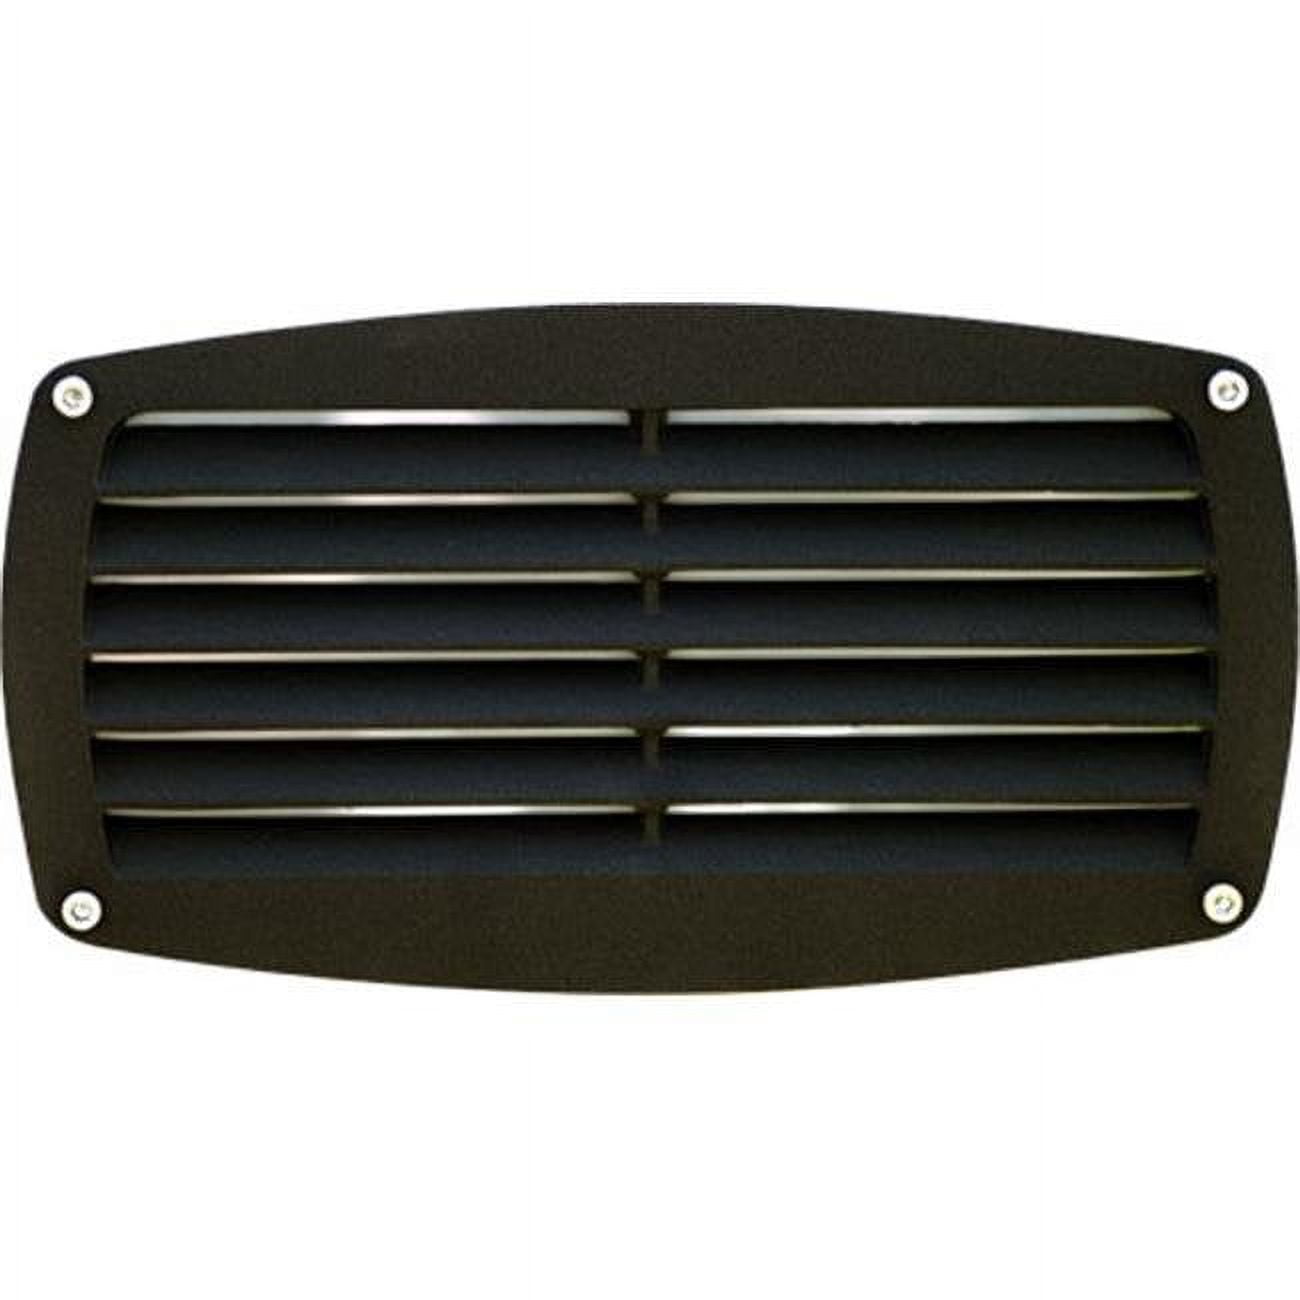 Picture of Dabmar Lighting DSL1017-B Recessed Louvered Brick, Step & Wall Light, Black - 4.85 x 8.95 x 3.80 in.